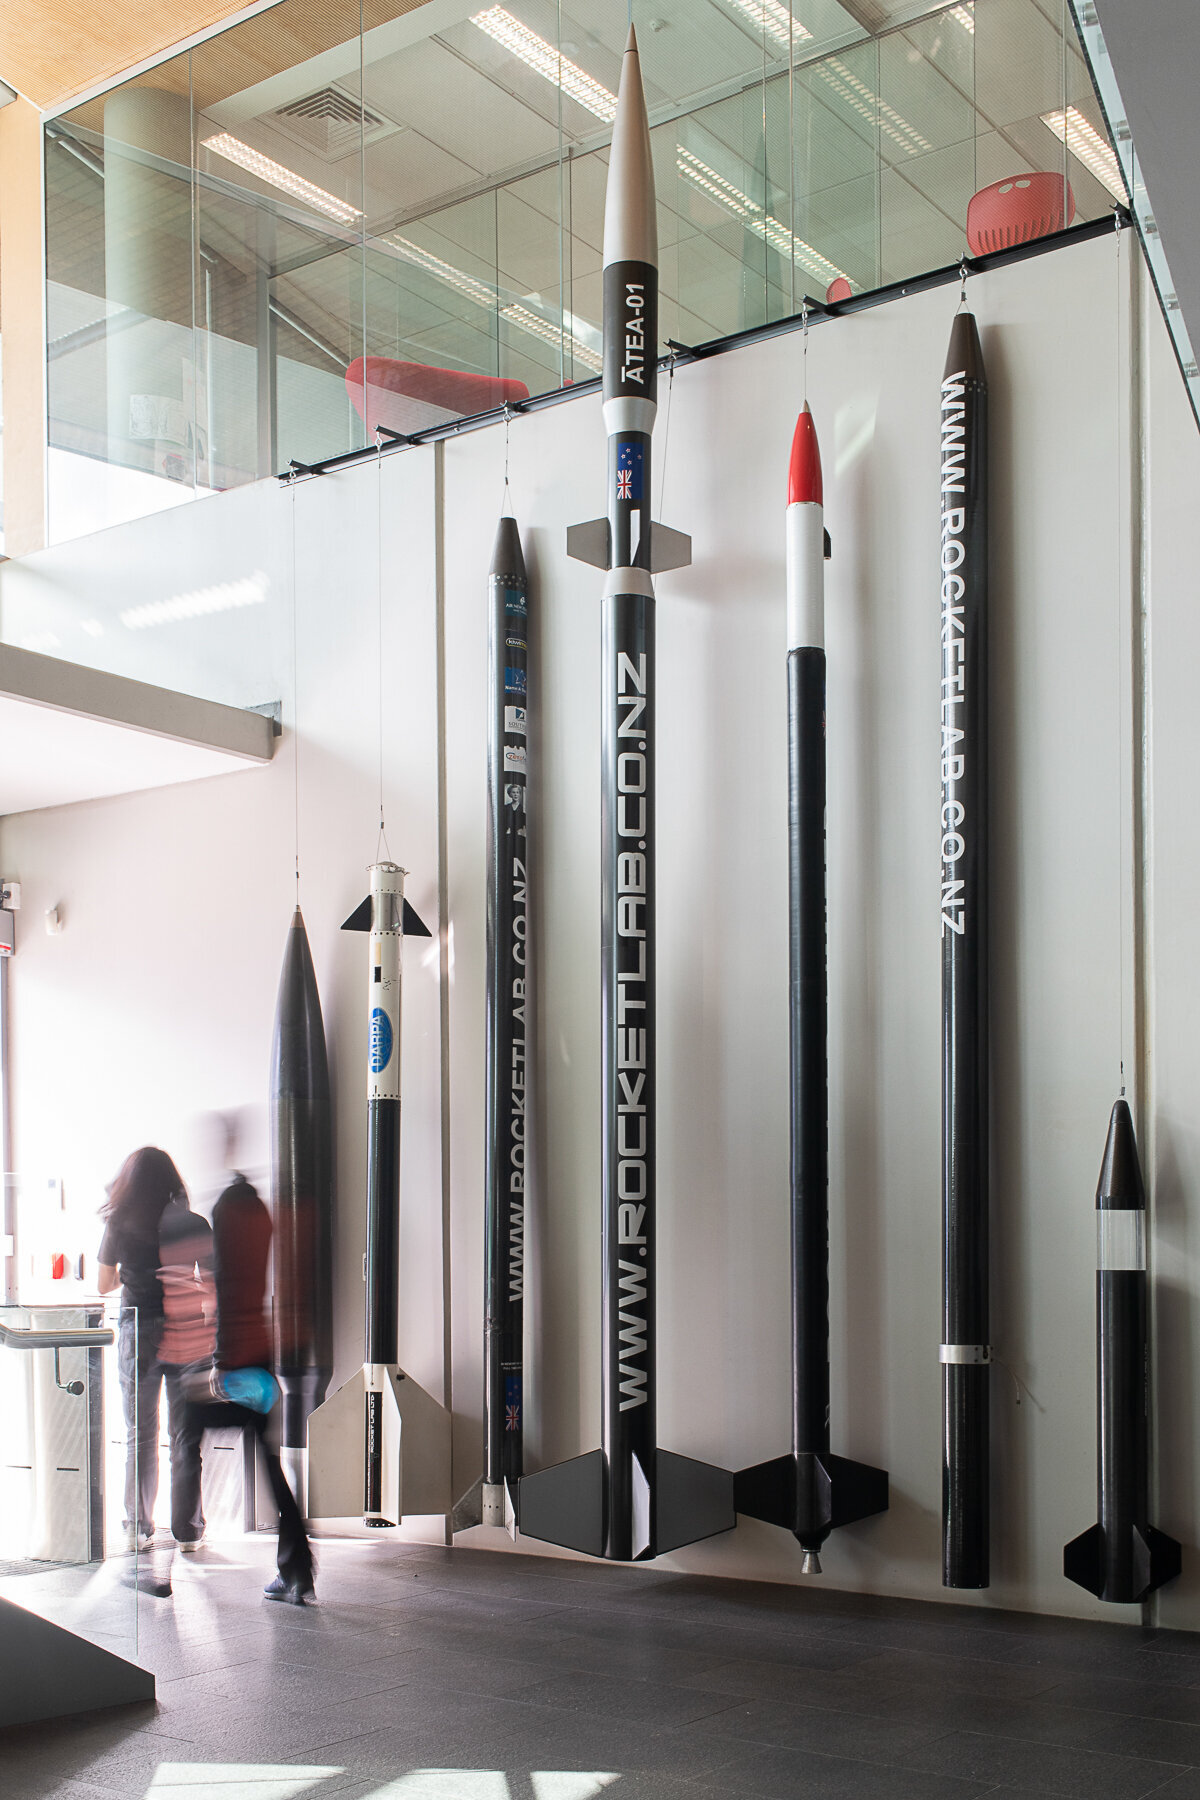 Rocket lab's Auckland Production Centre. Foyer shot showing Peter Beck's numerous test rockets mounted to the wall